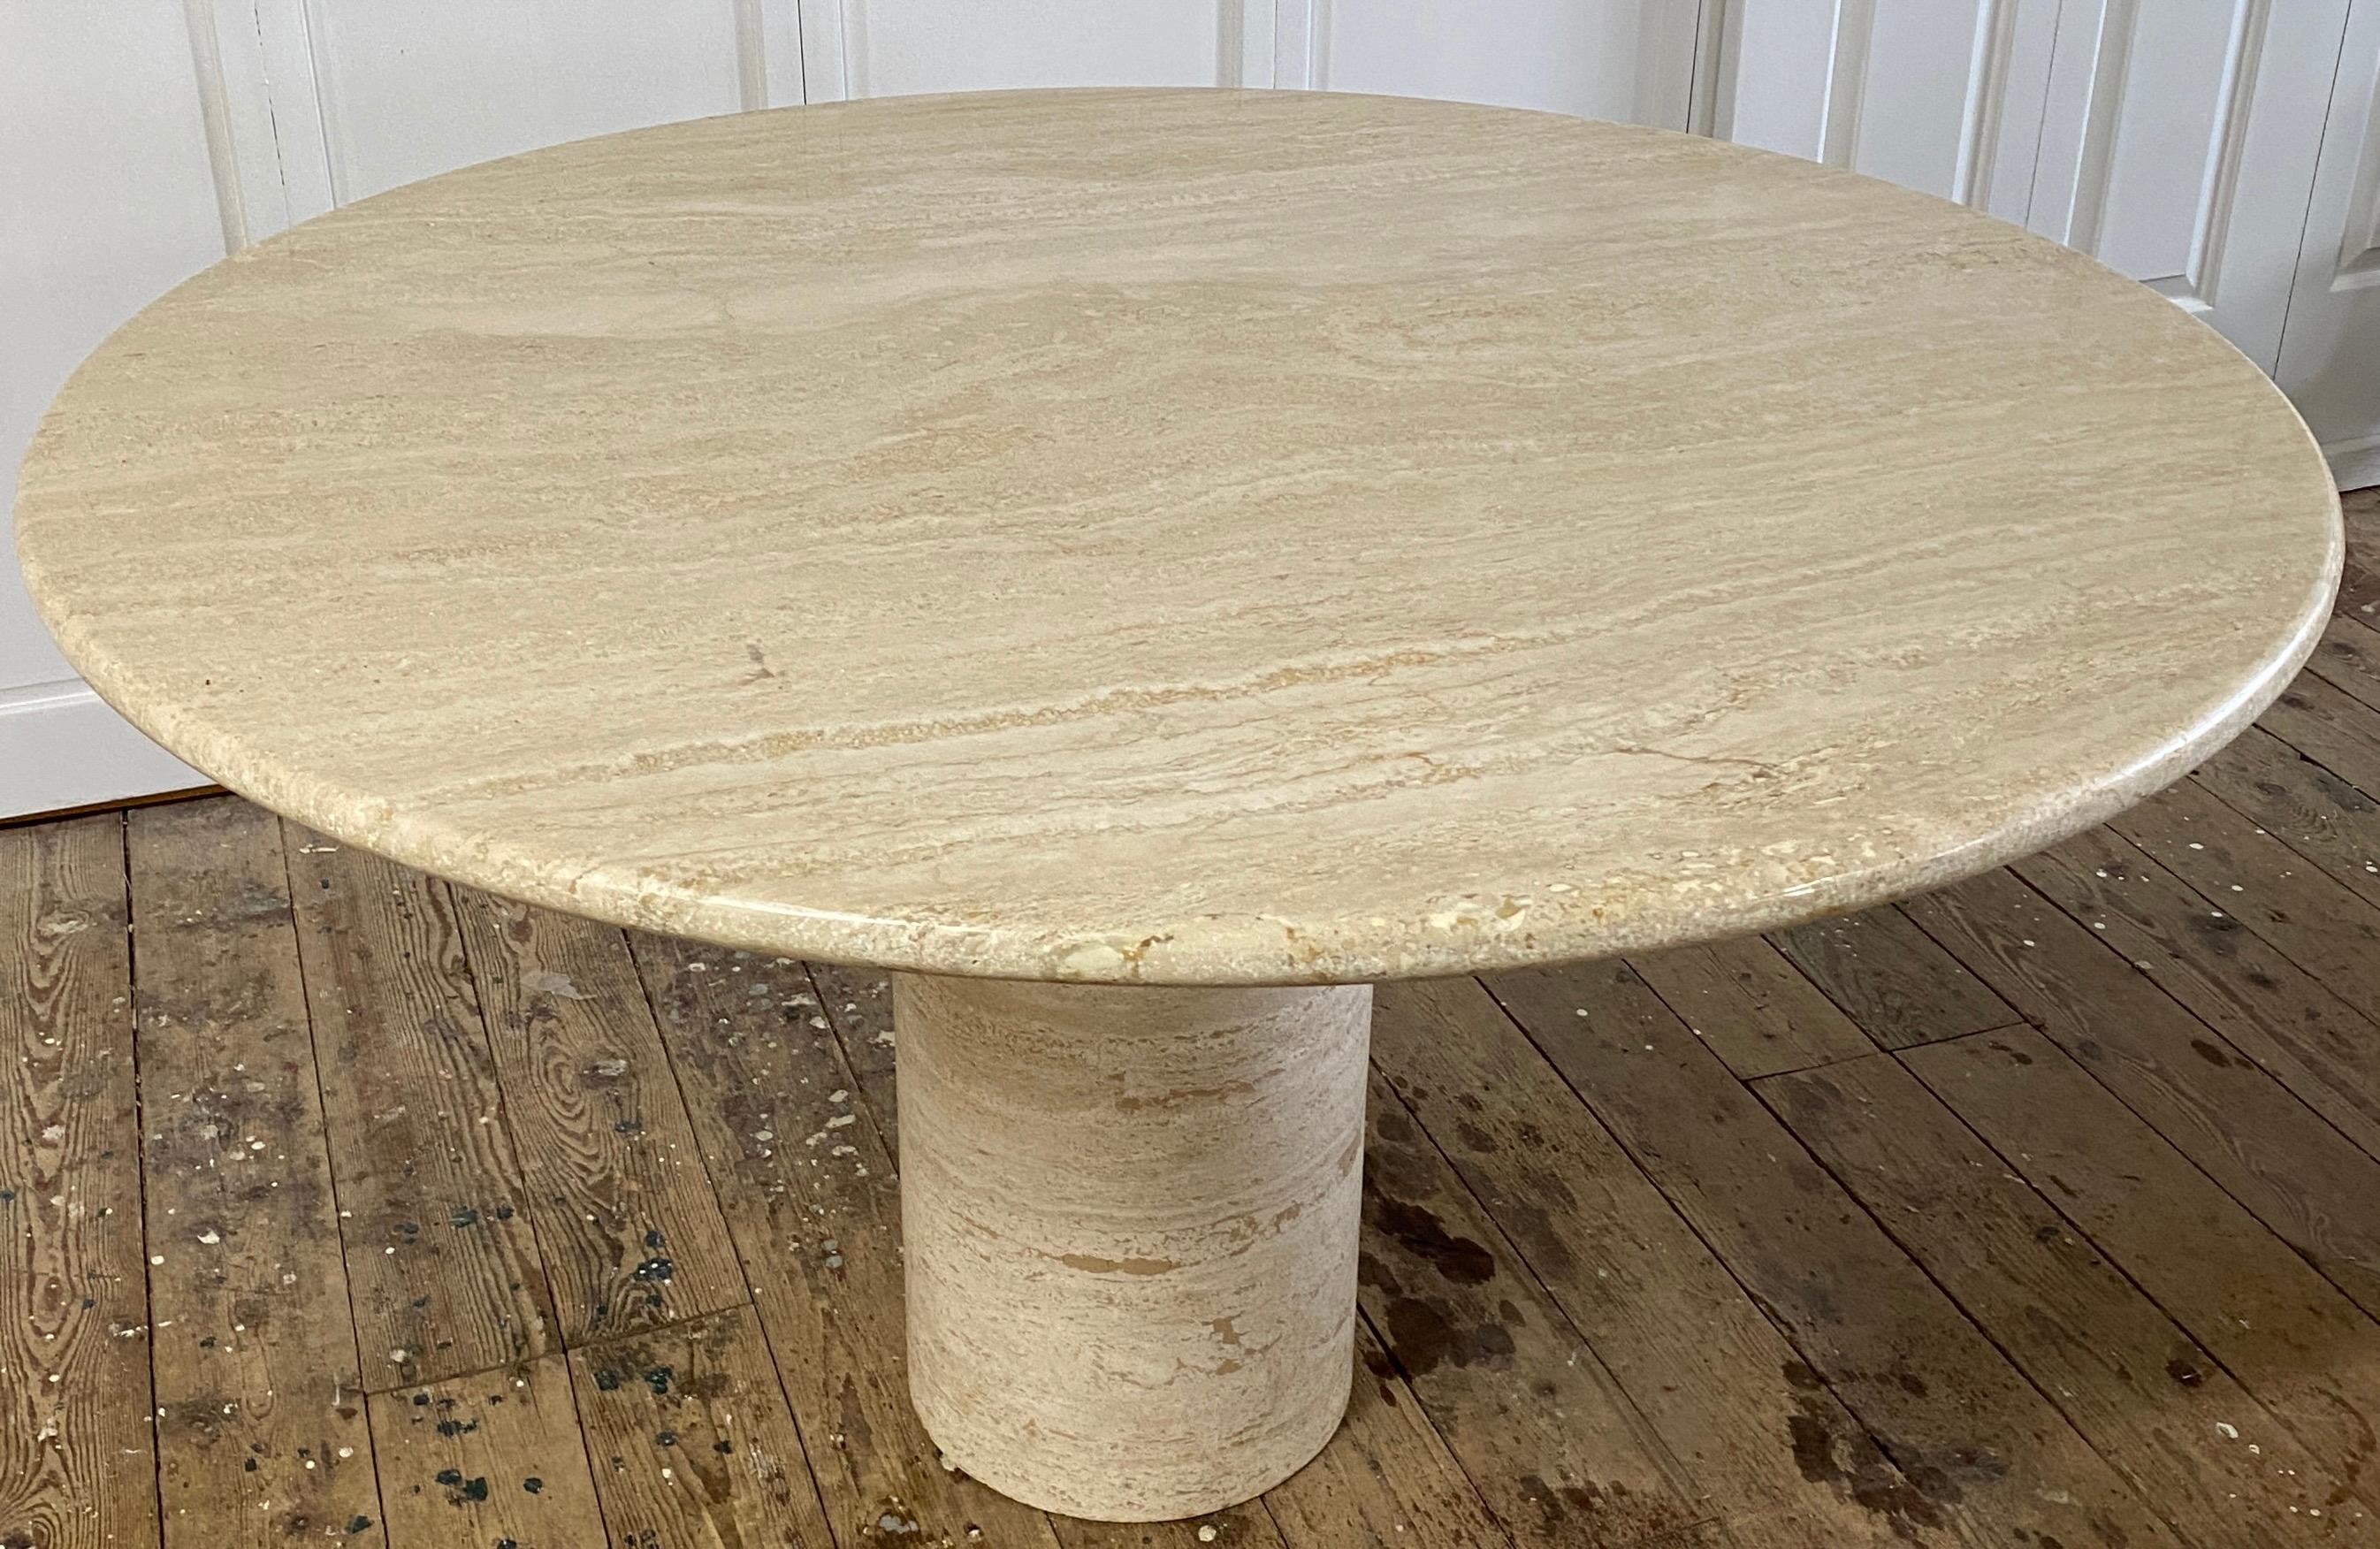 Beautifully carved from a single large slab, this round streamlined travertine top is set on top of a slender circular pedestal base giving it elegance and simplicity to work in the most modern or antique setting. The top and base have been sealed